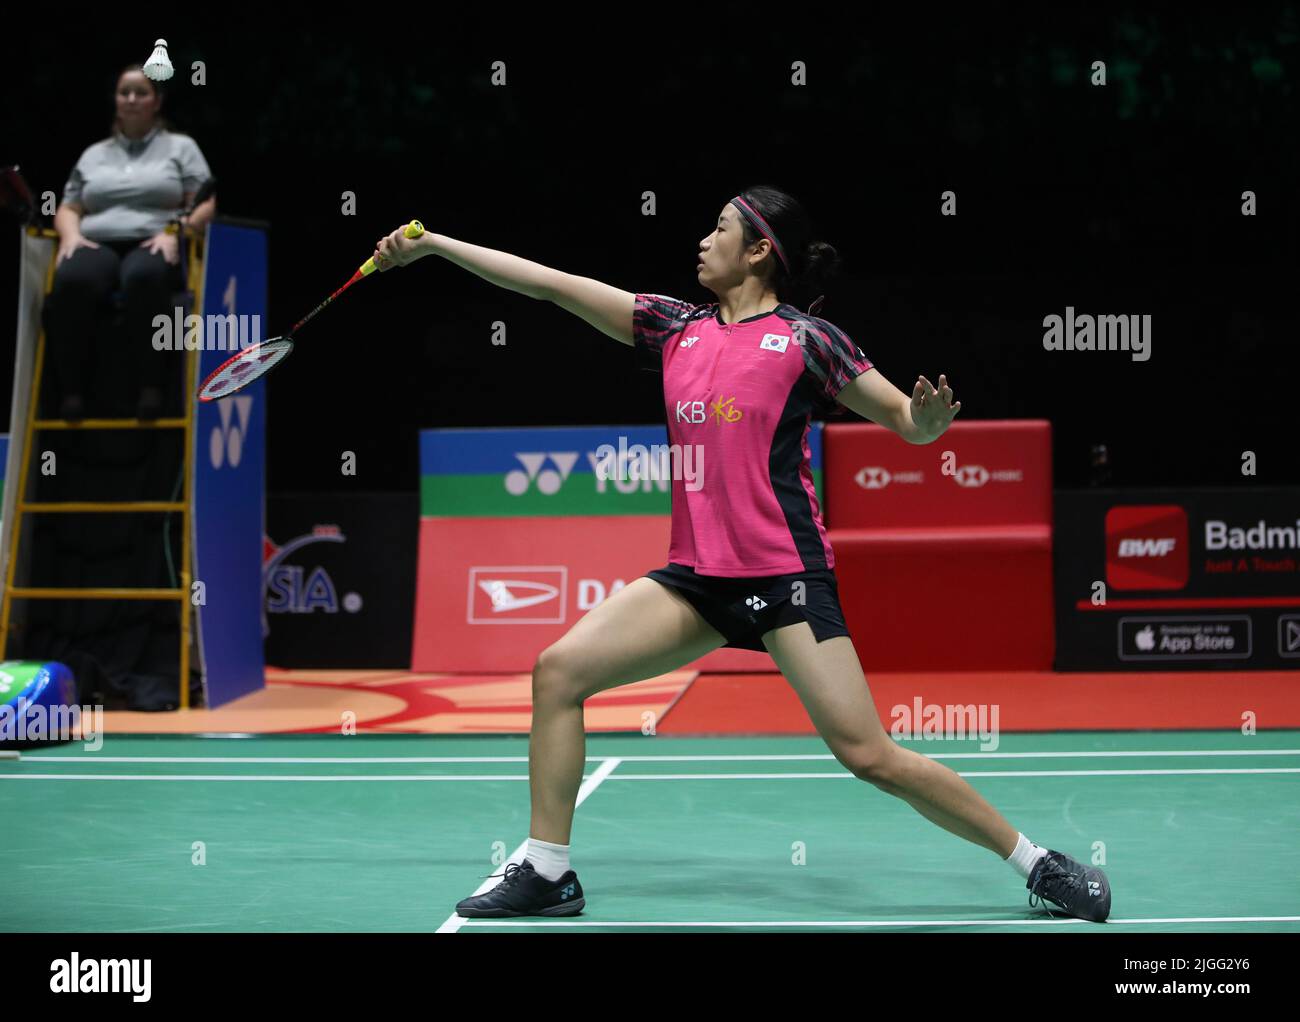 An Se Young of Korea competes against Chen Yu Fei of China during the Womens Single Final match of the Perodua Malaysia Masters 2022 at Axiata Arena, Bukit Jalil